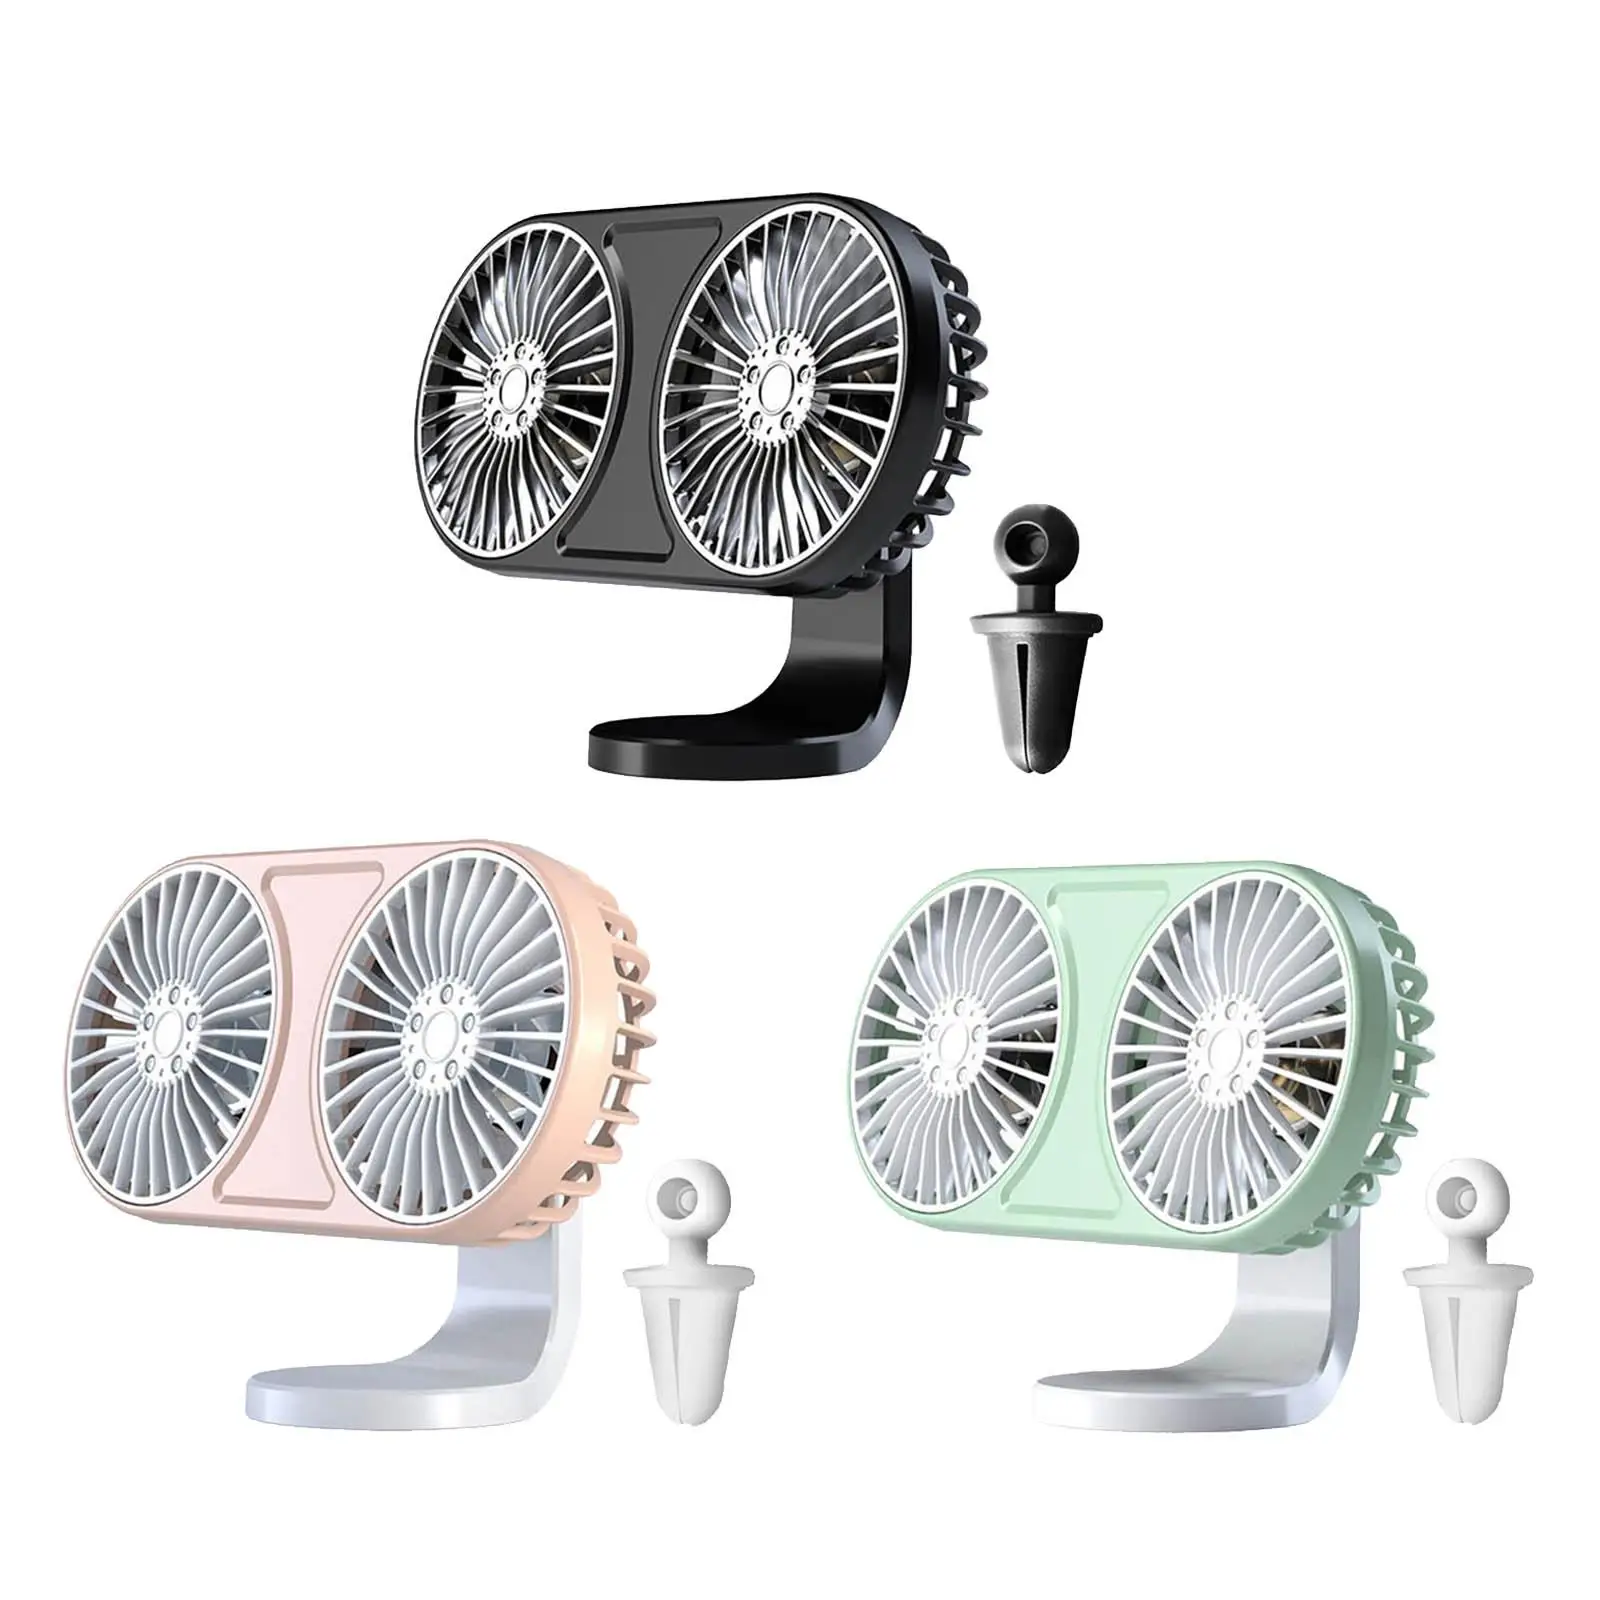 Car Fan Angle Adjustable Rechargeables for Vehicles Truck